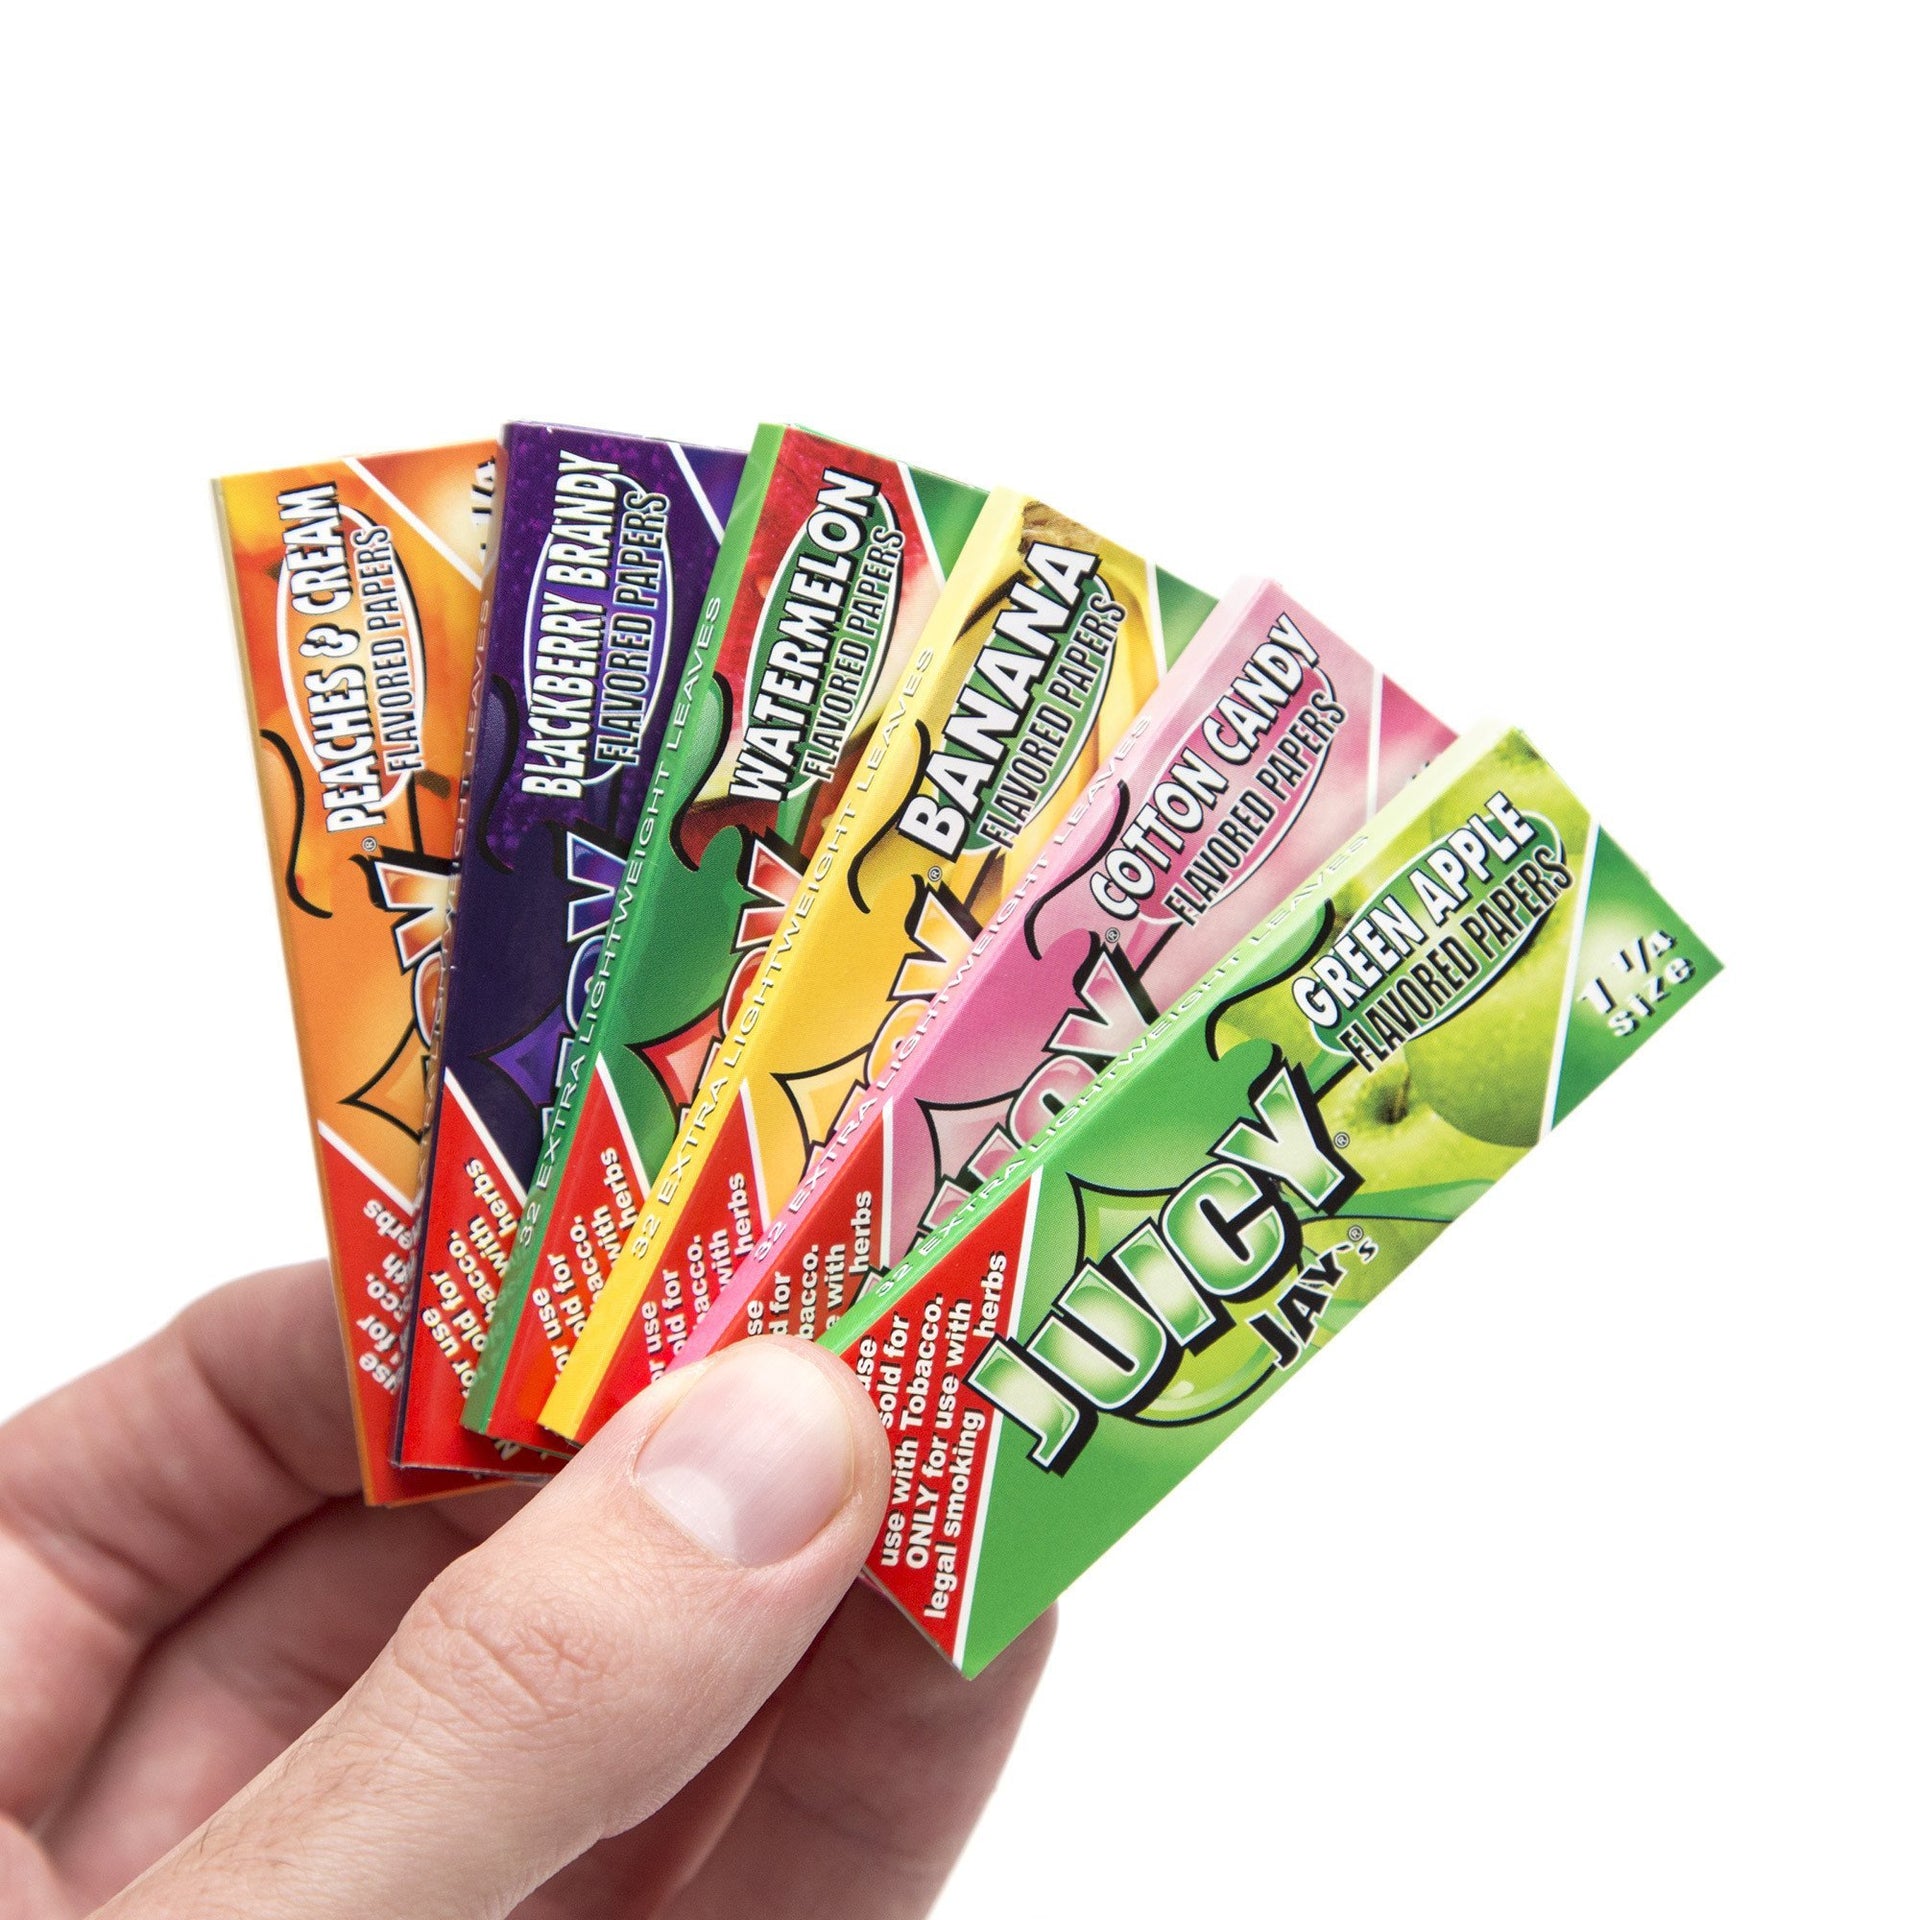 Juicy Jay's 1 1/4in Flavored Papers - Peach - 420 Science - The most trusted online smoke shop.